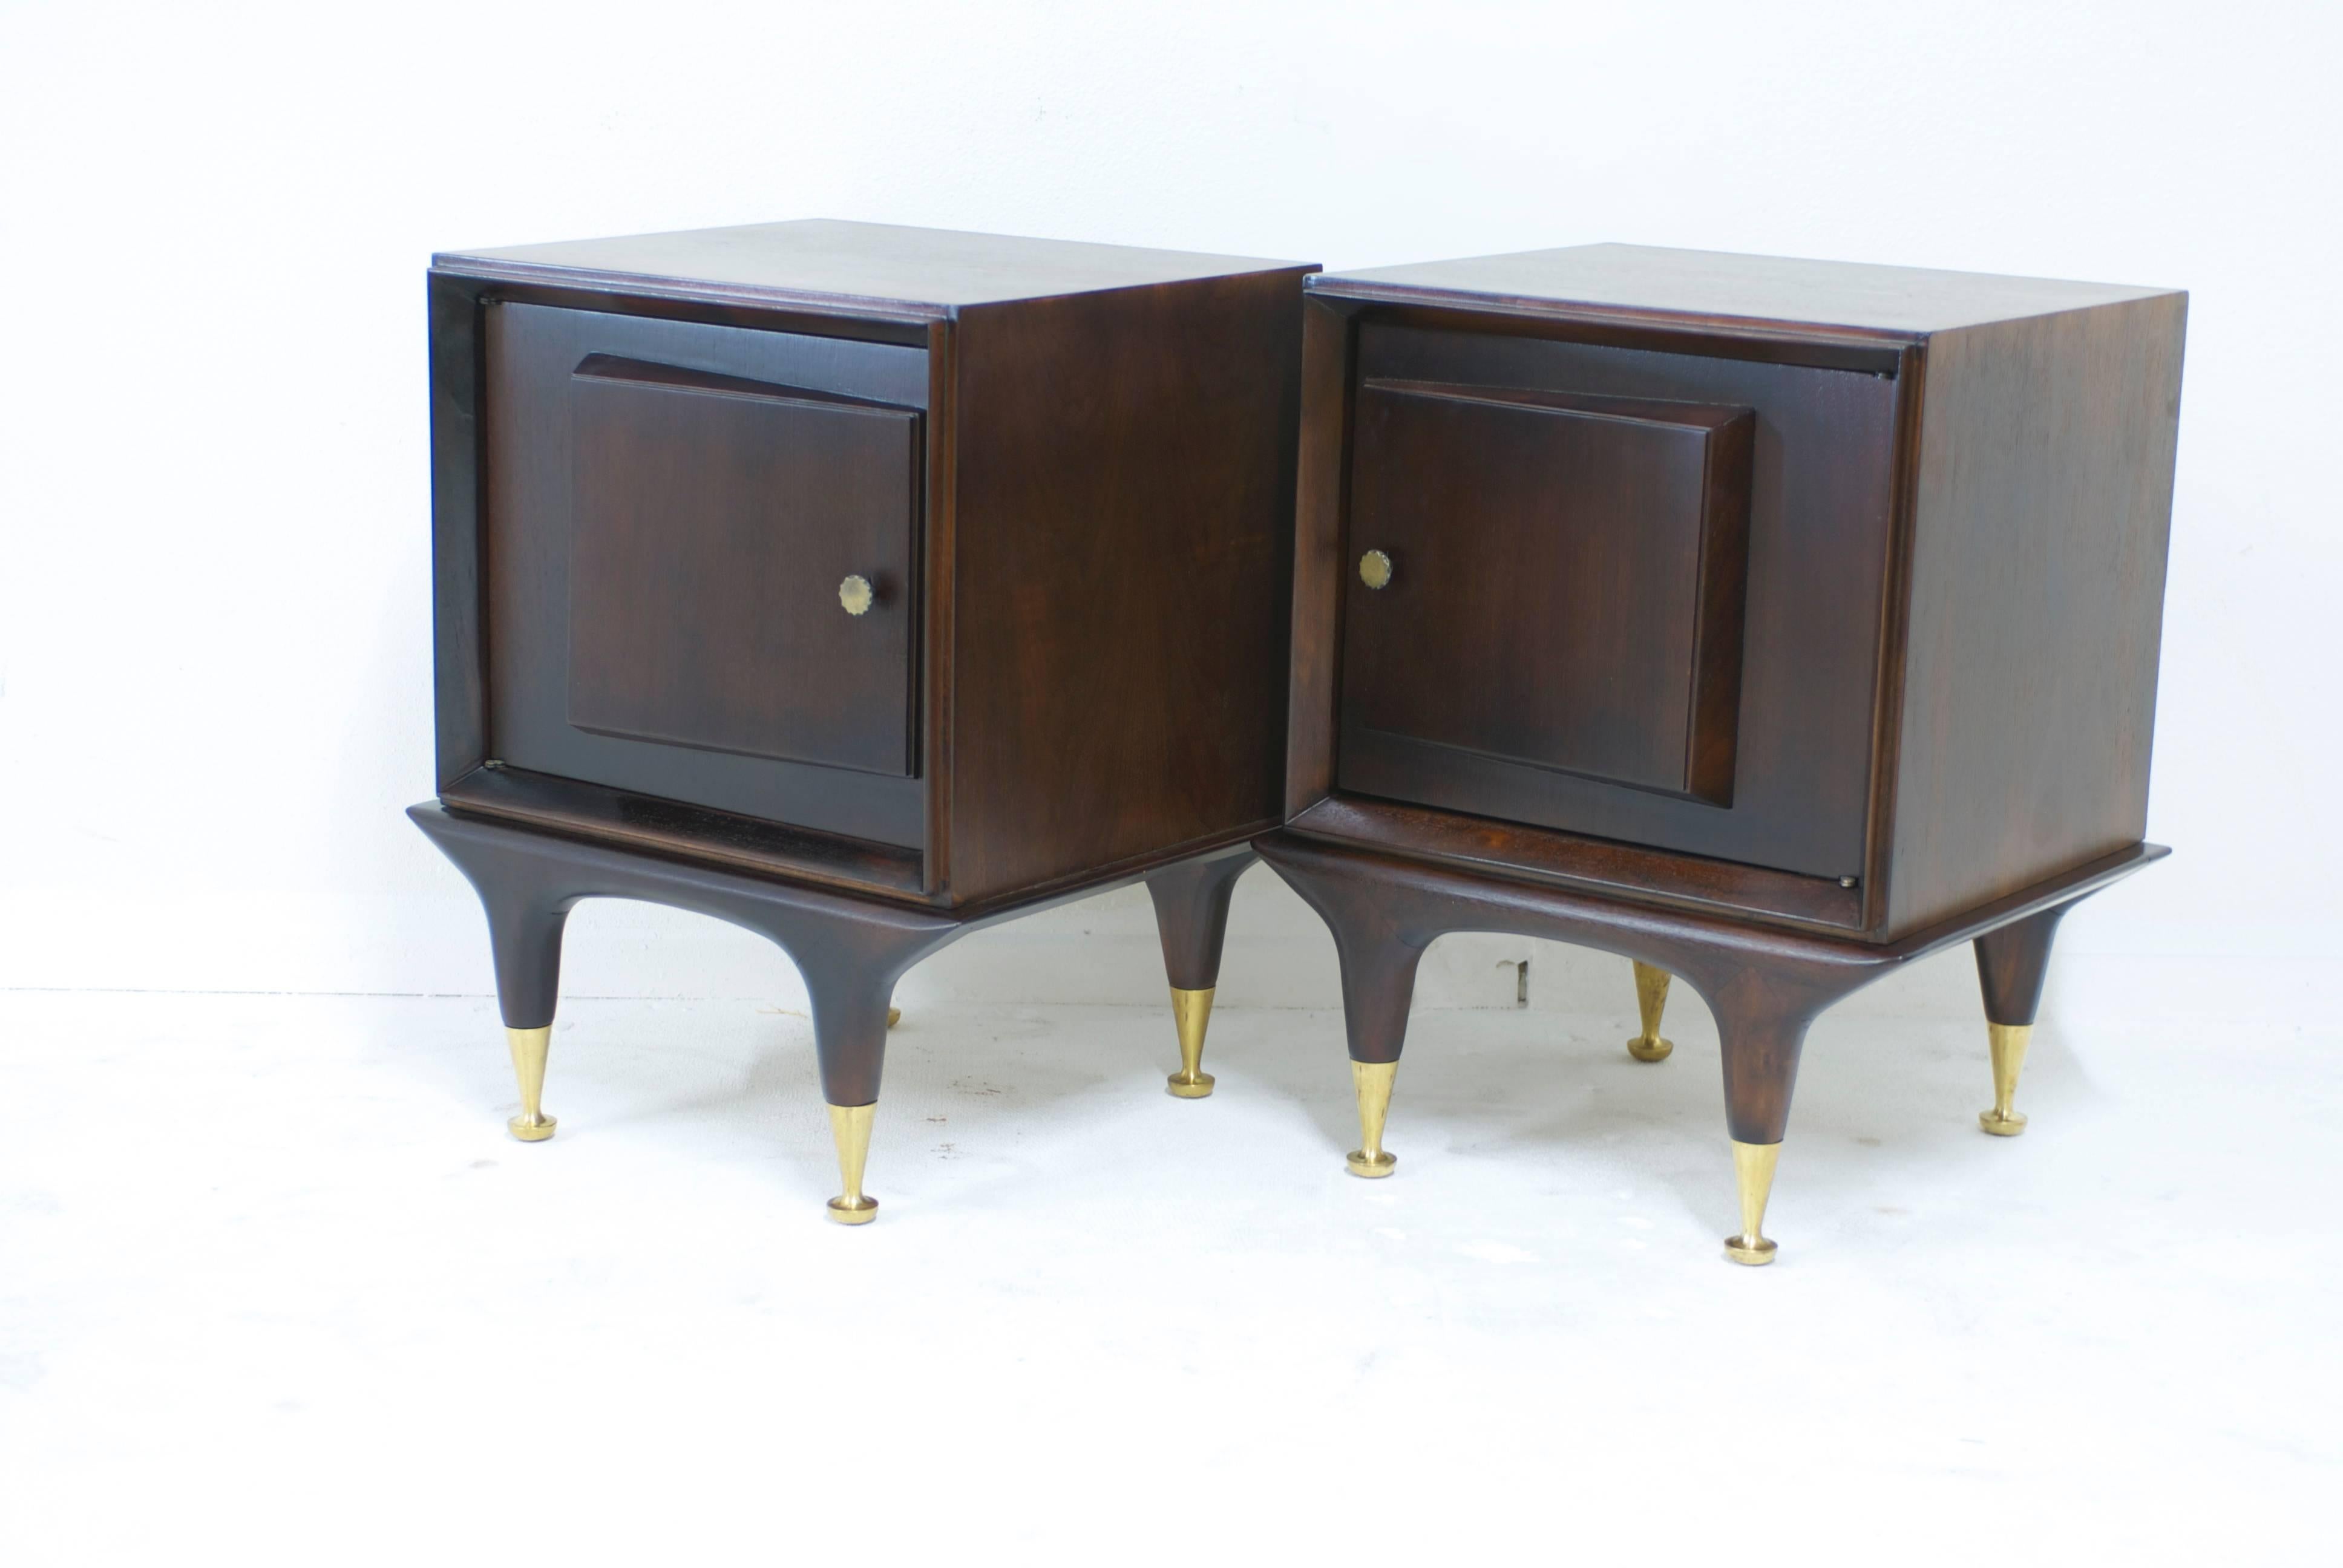 A sculptural pair of Mid-Century bedside cabinets made of mahogany.
The cabinets have a door set on an angle for visual interest giving them a cubist feeling. The nightstands retain all of their original hardware including the brass sabots on the